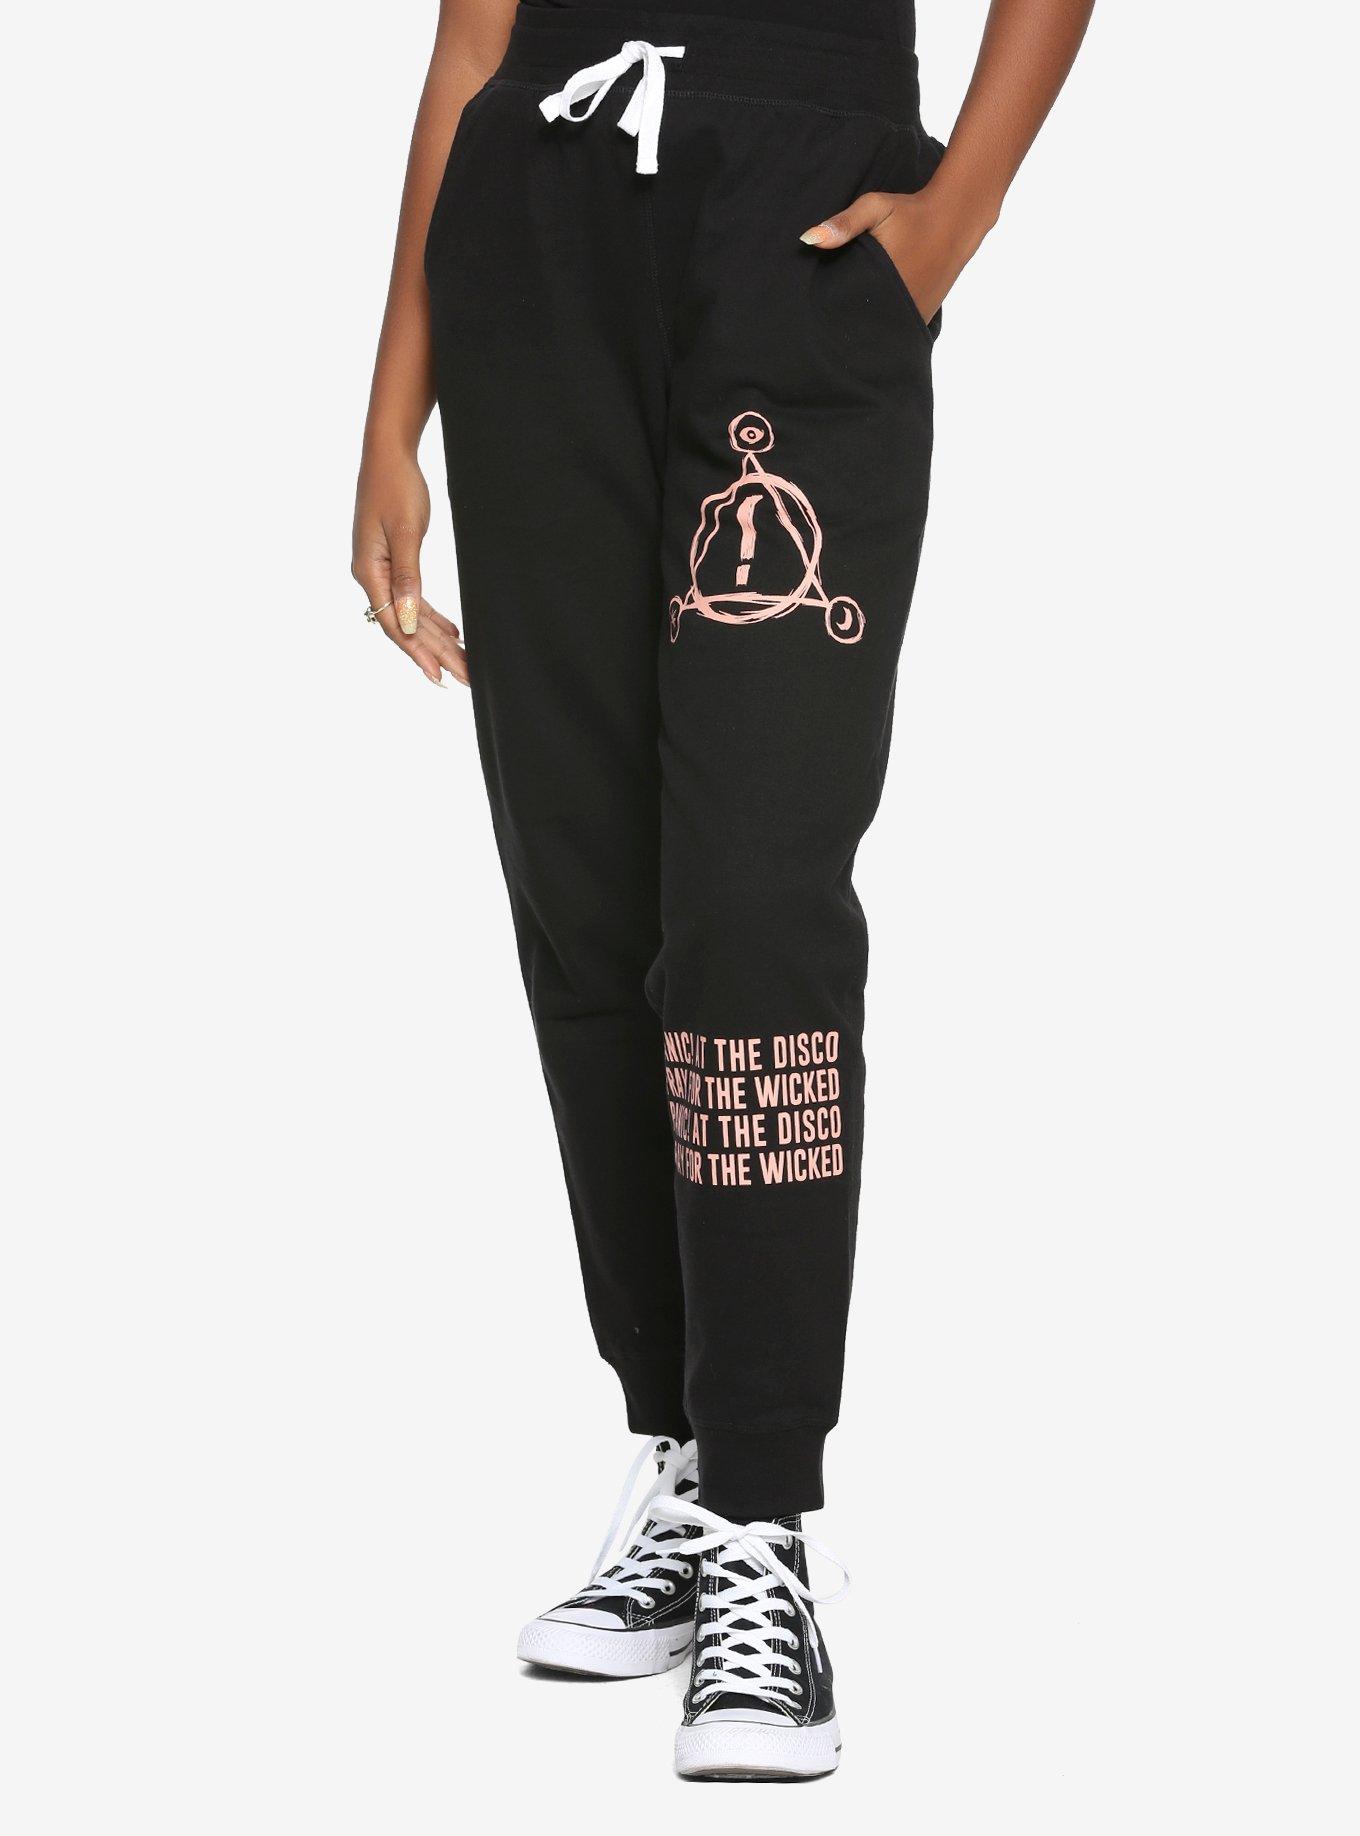 Panic! At The Disco Pray For The Wicked Pink Logo Girls Jogger Pants, BLACK, hi-res